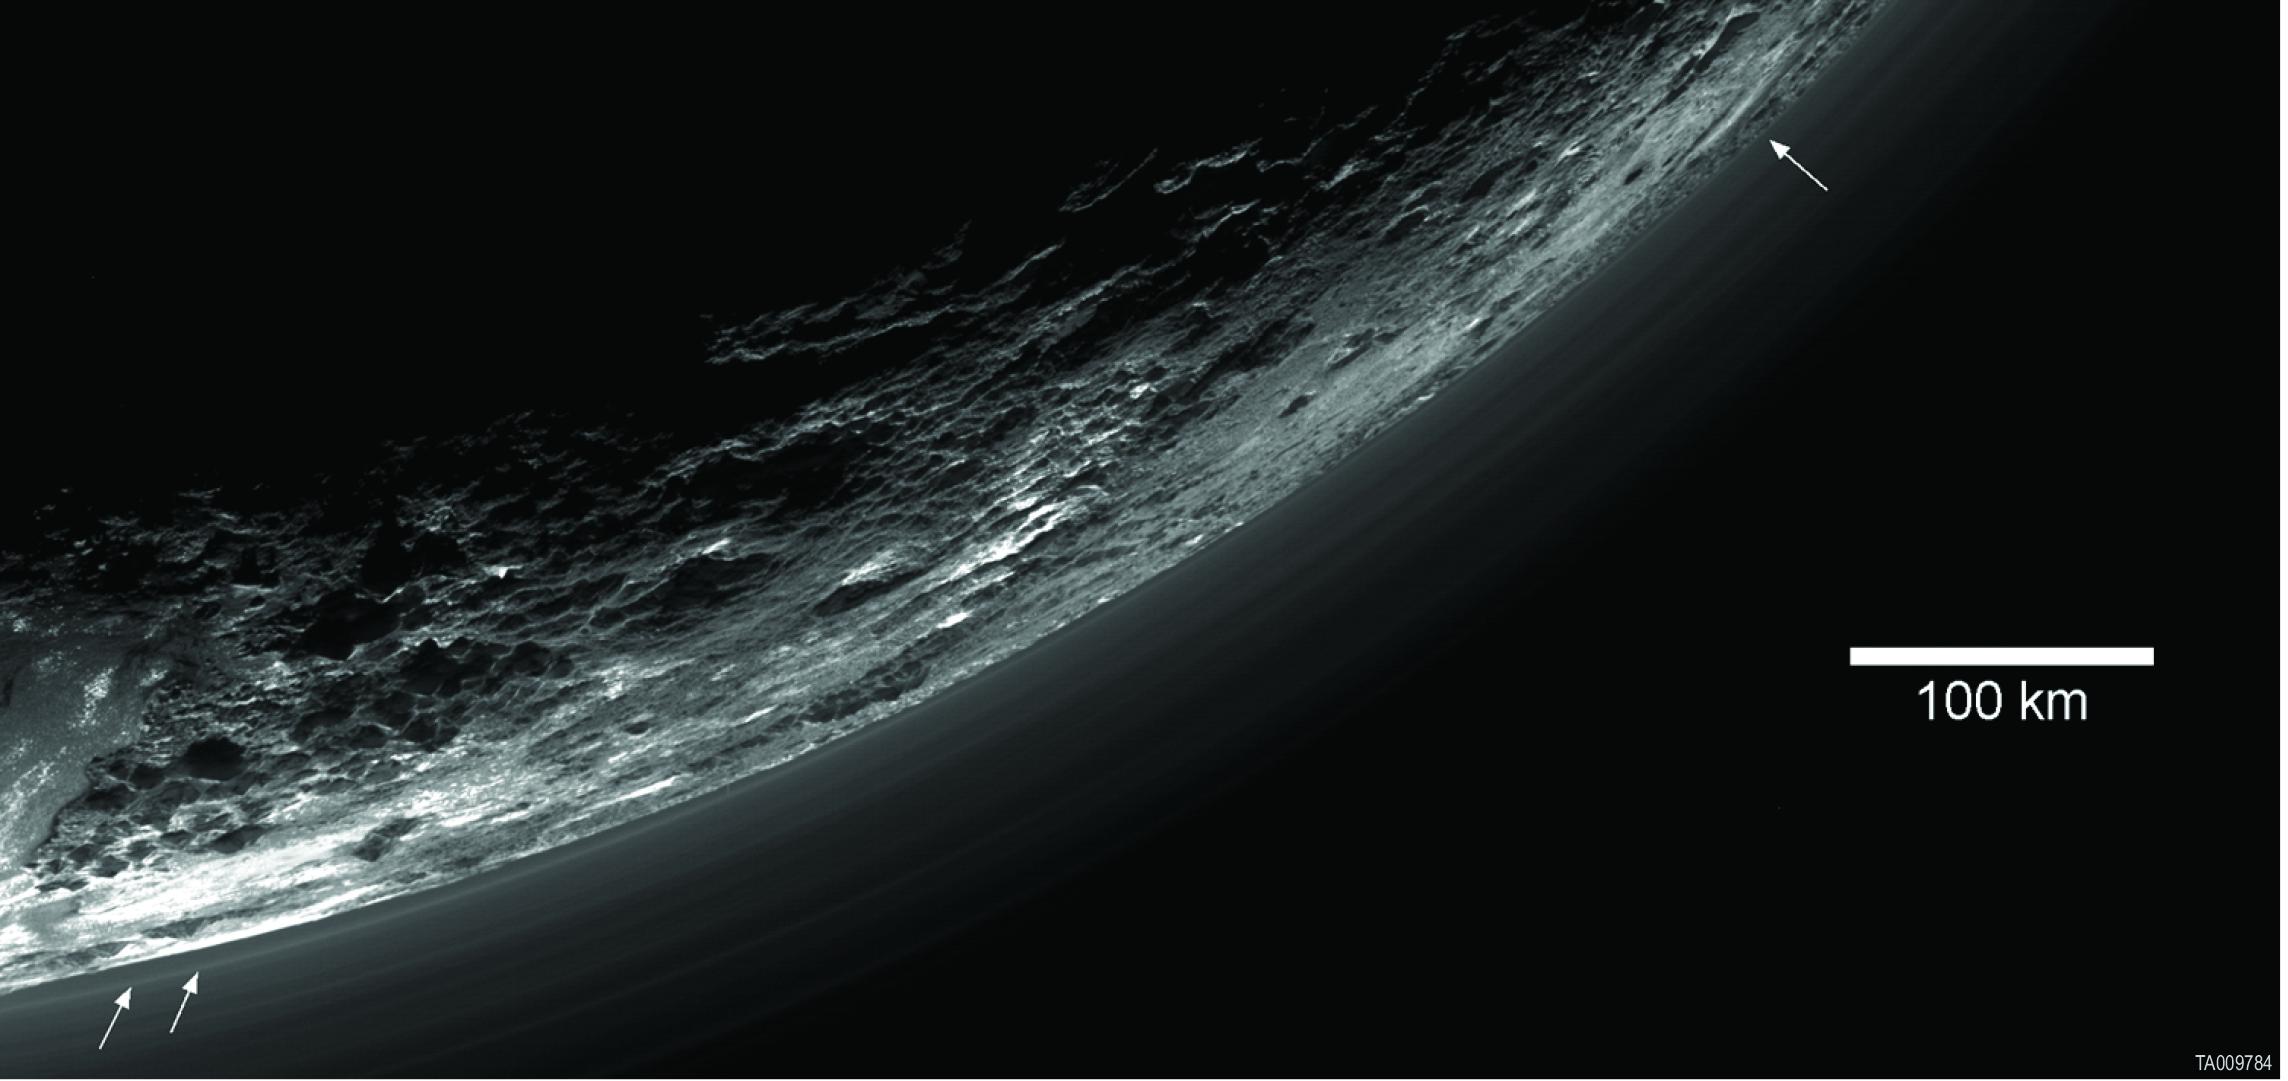 This image of haze layers above Pluto limb was taken by NASA New Horizons spacecraft. About 20 haze layers are seen.